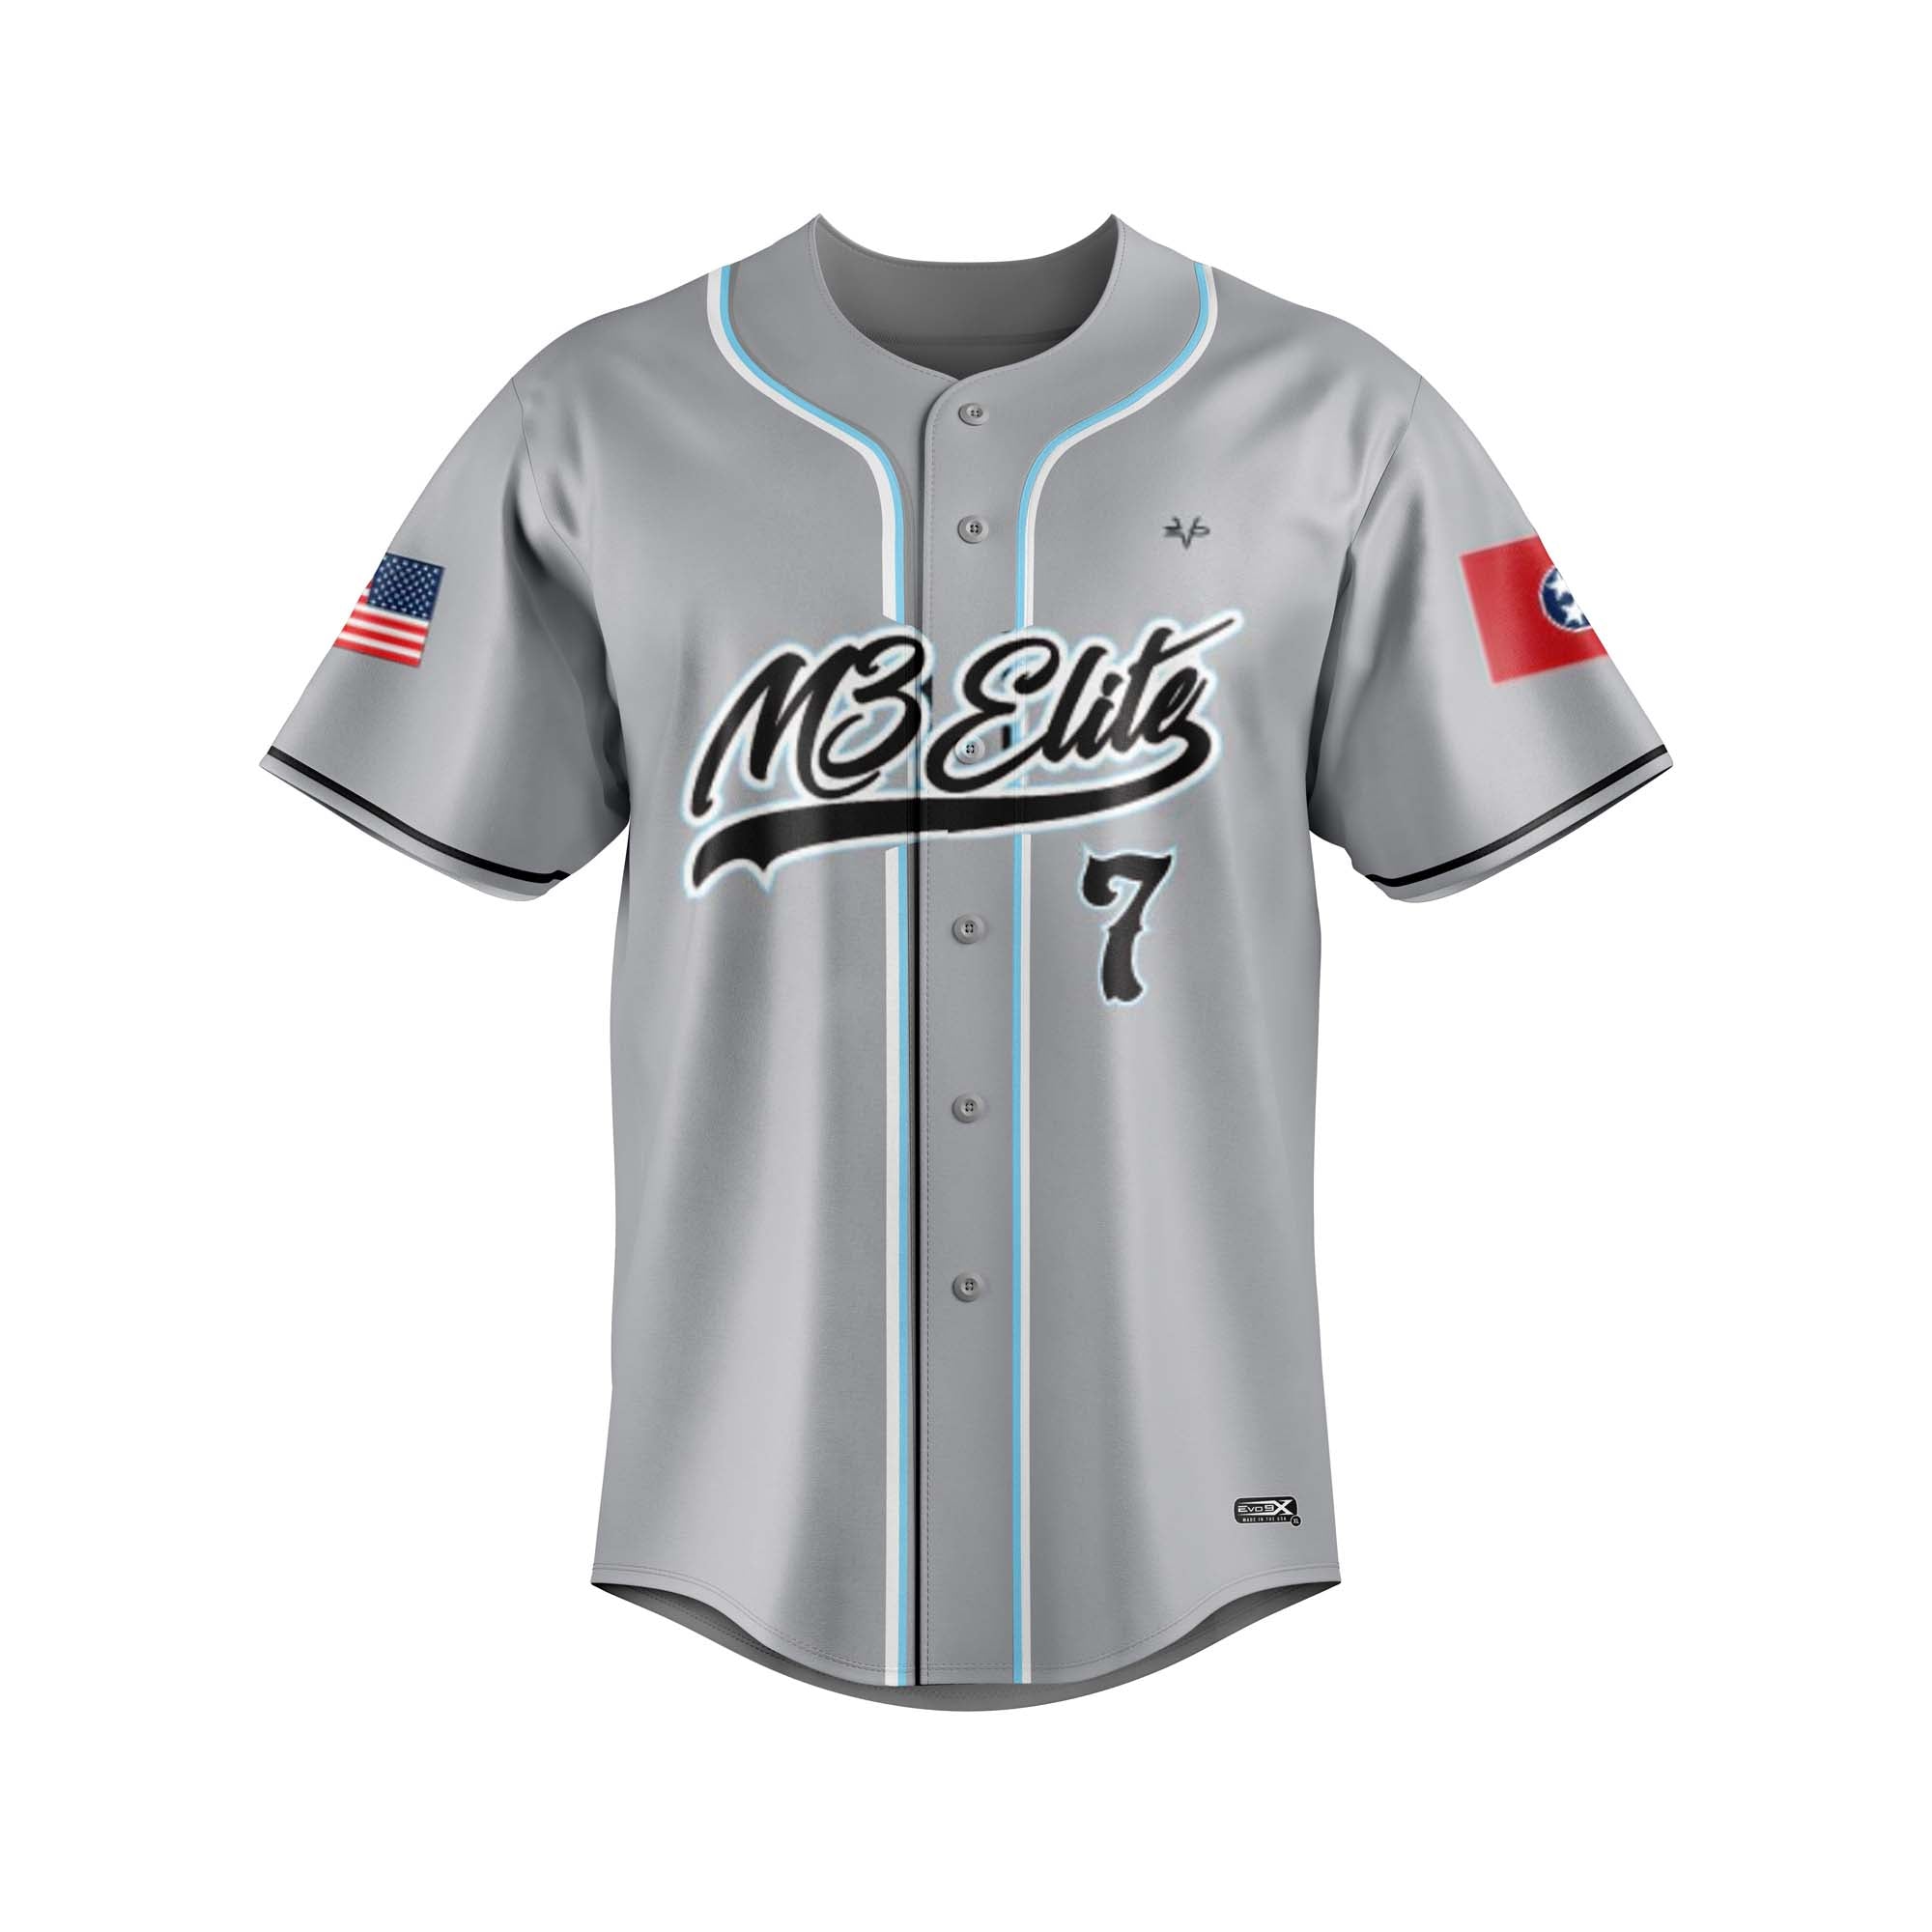 M3 ELITE Baseball Sublimated Full Button Jersey Grey